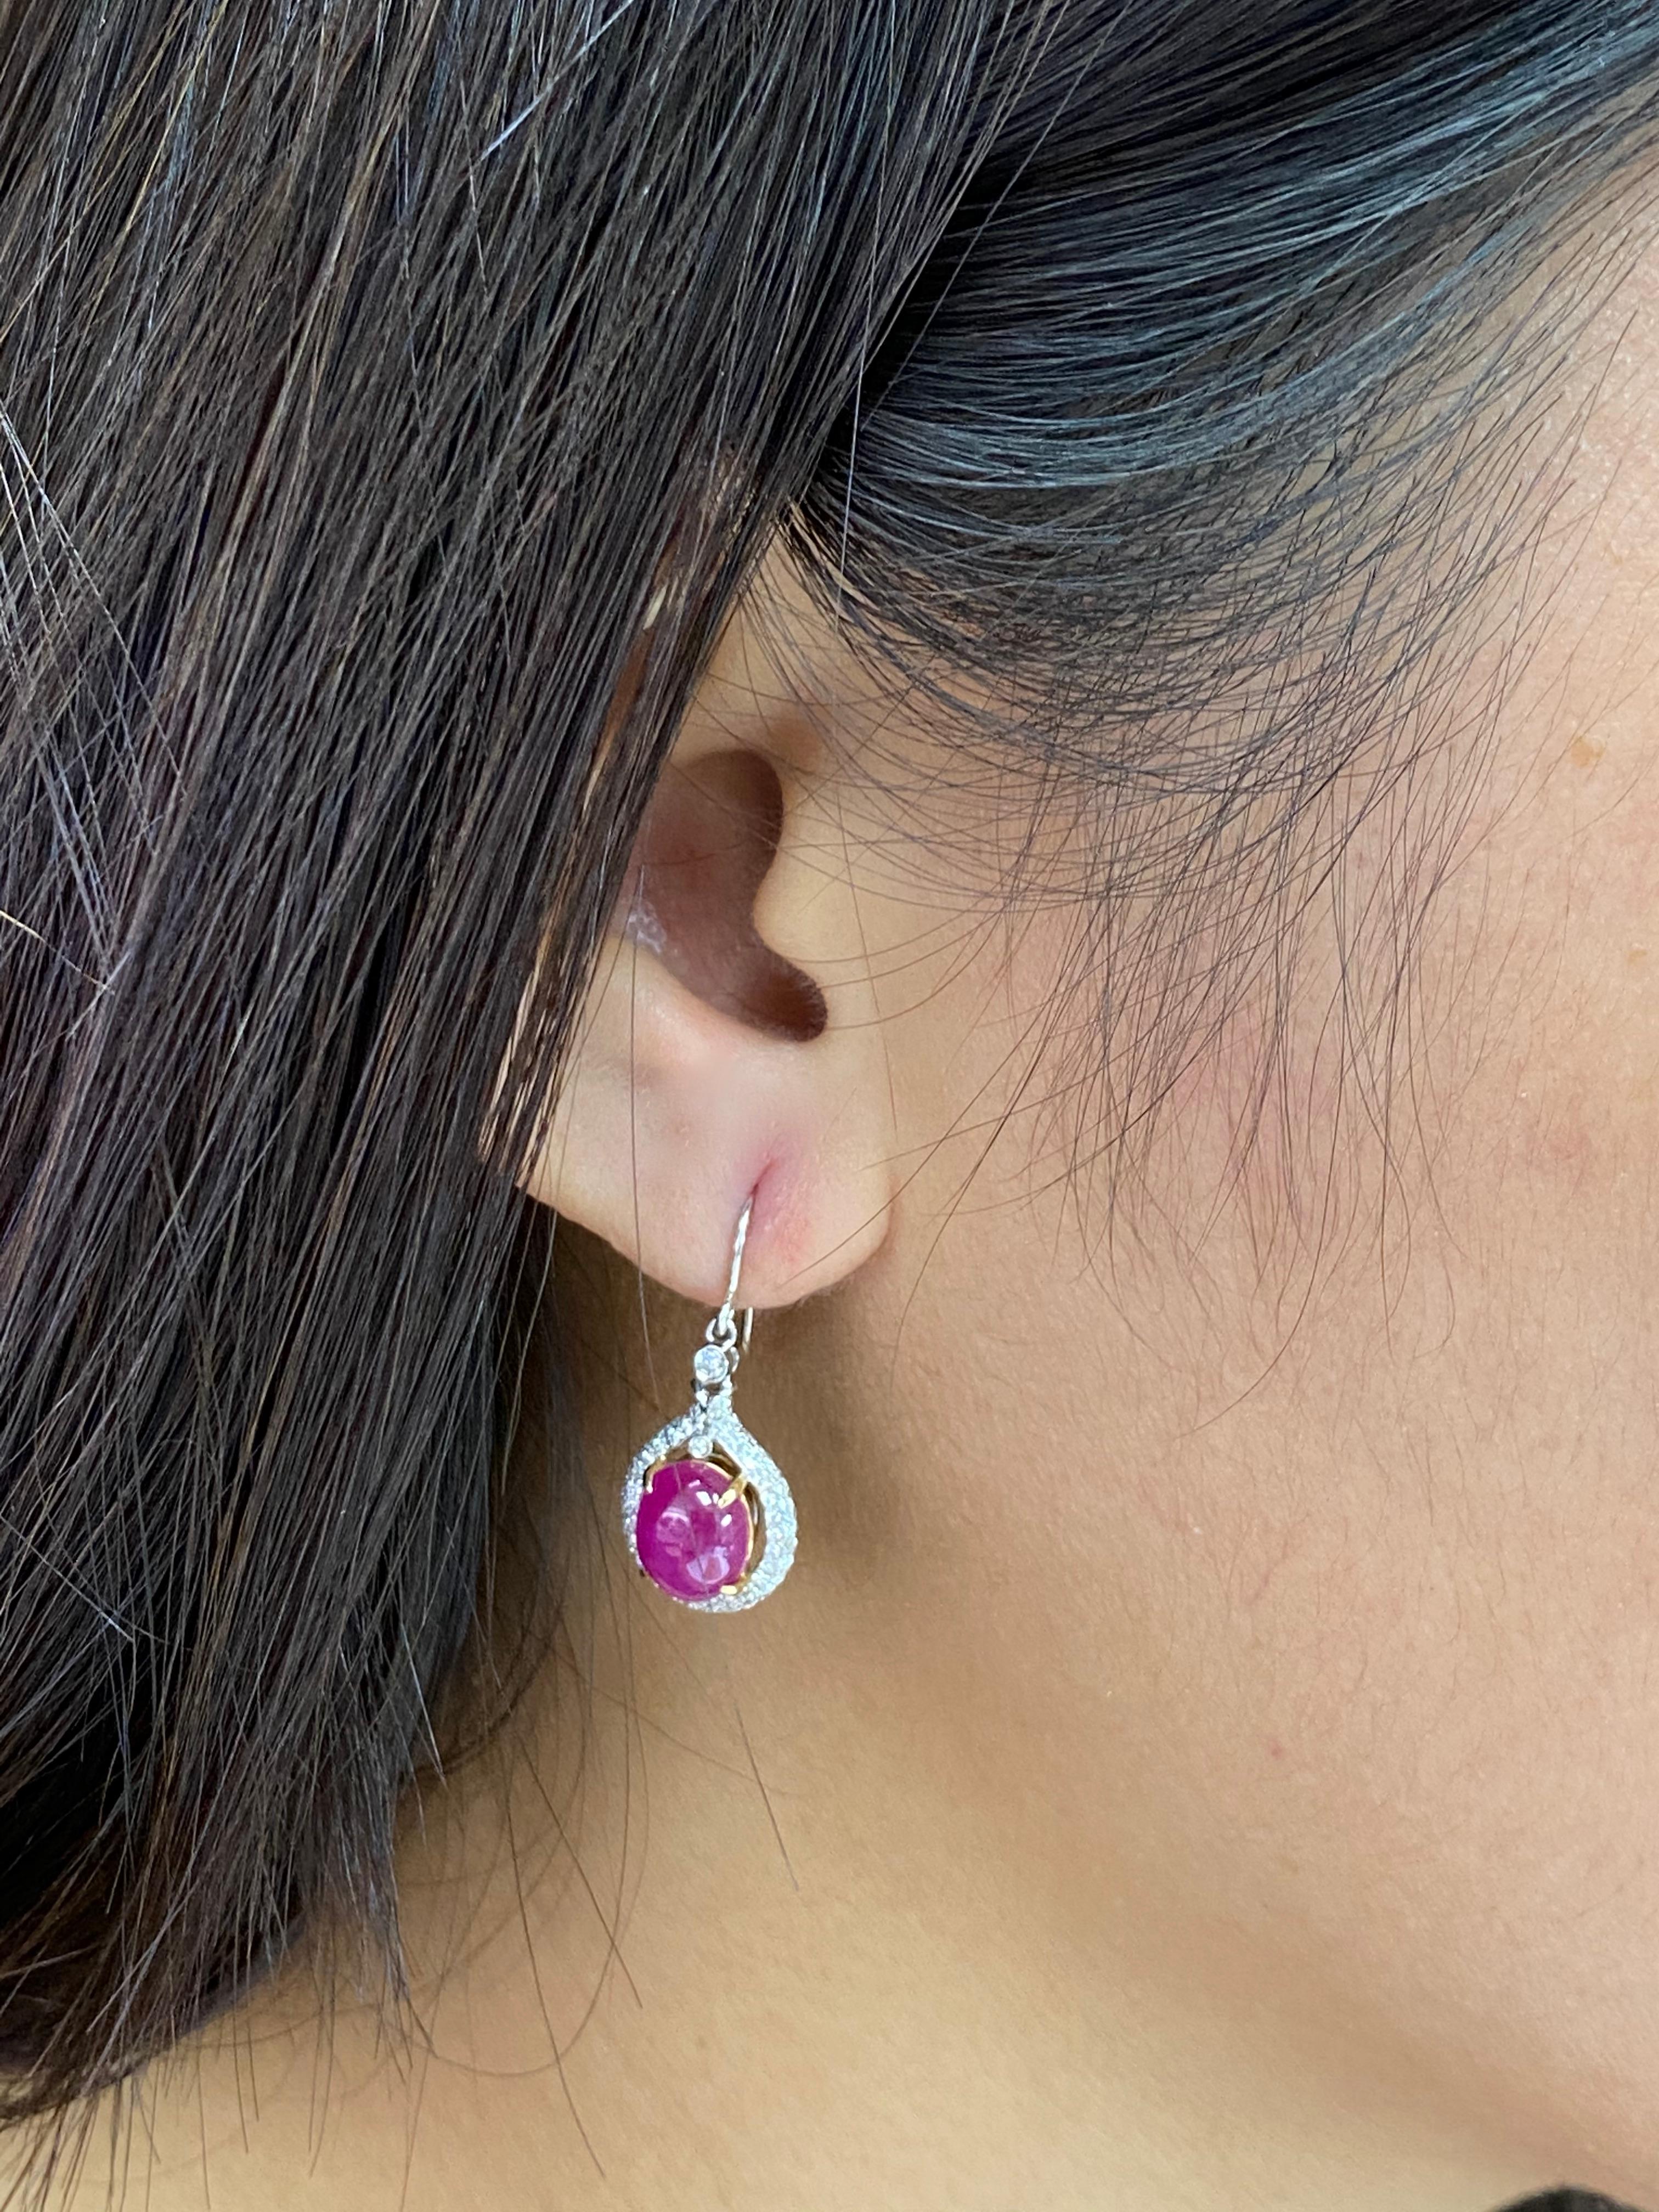 Here is a pair of nice Ruby and diamond earrings. The earrings are set in 18k white gold and white diamonds. There are 2 Burma ruby cabochons totaling 4.98Cts. There are 168 small diamonds totaling 0.63cts in the earrings. The rubies are red-pink in